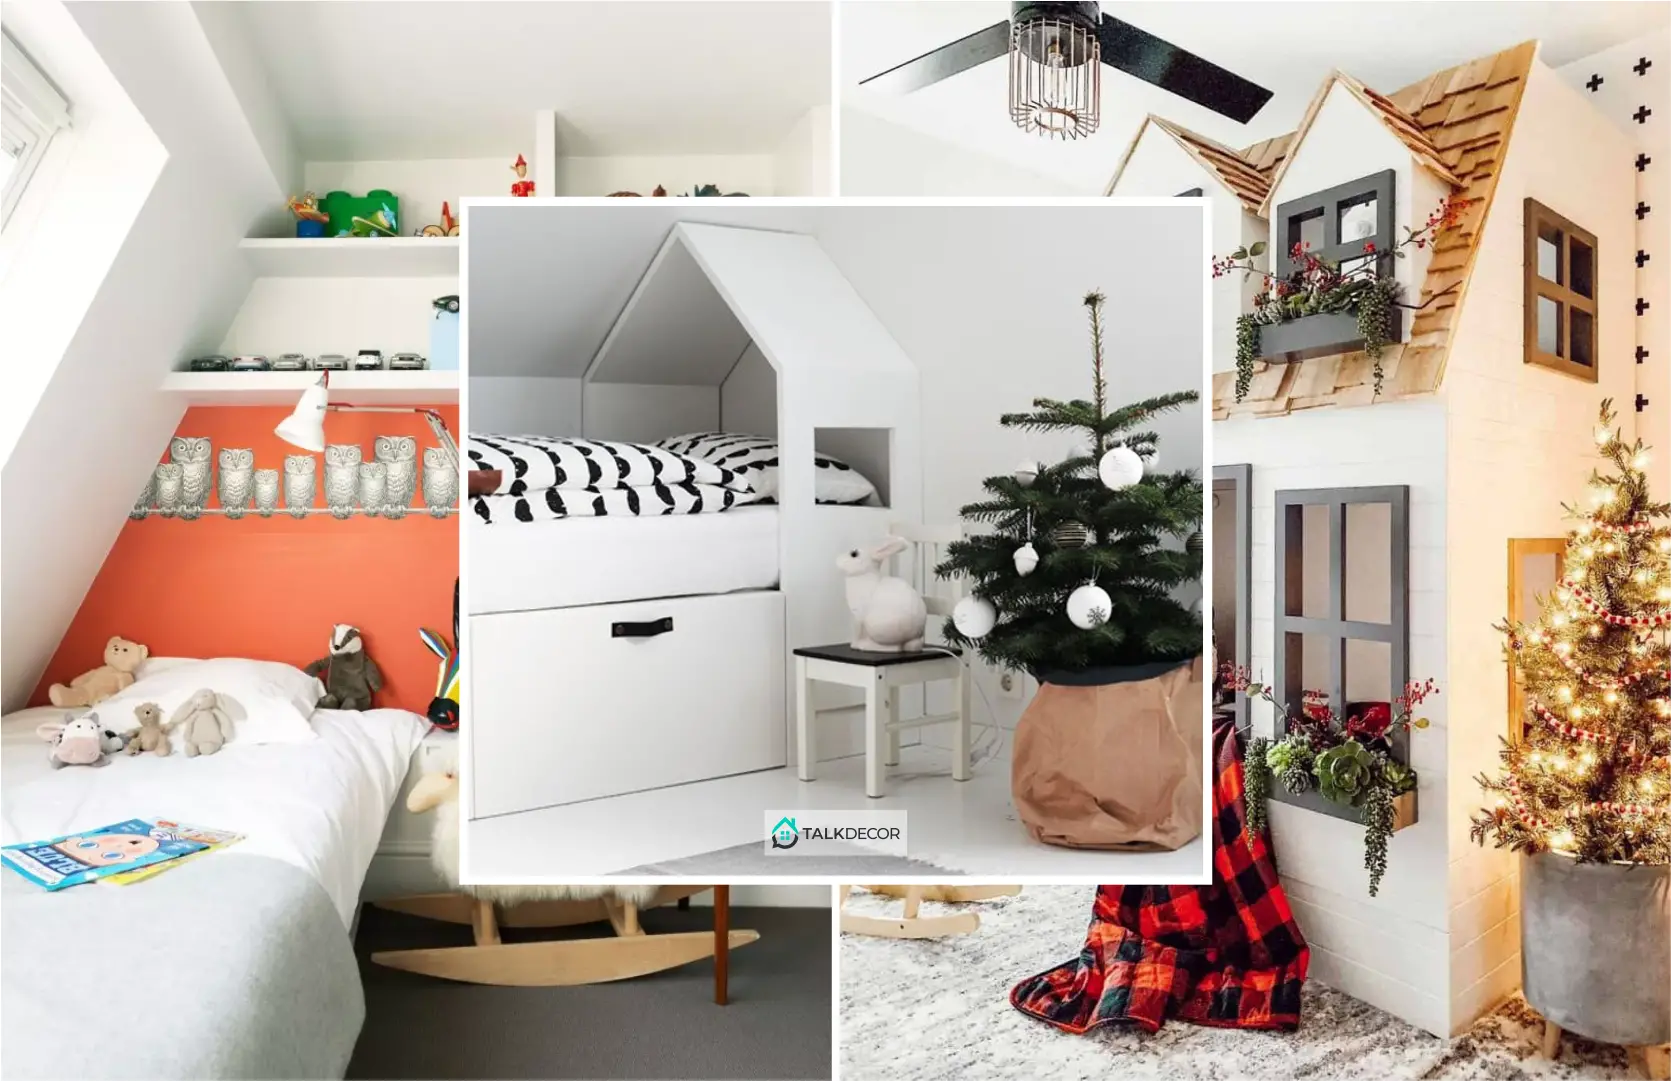 60 Fun Winter Decorations for Your Kids’ Room